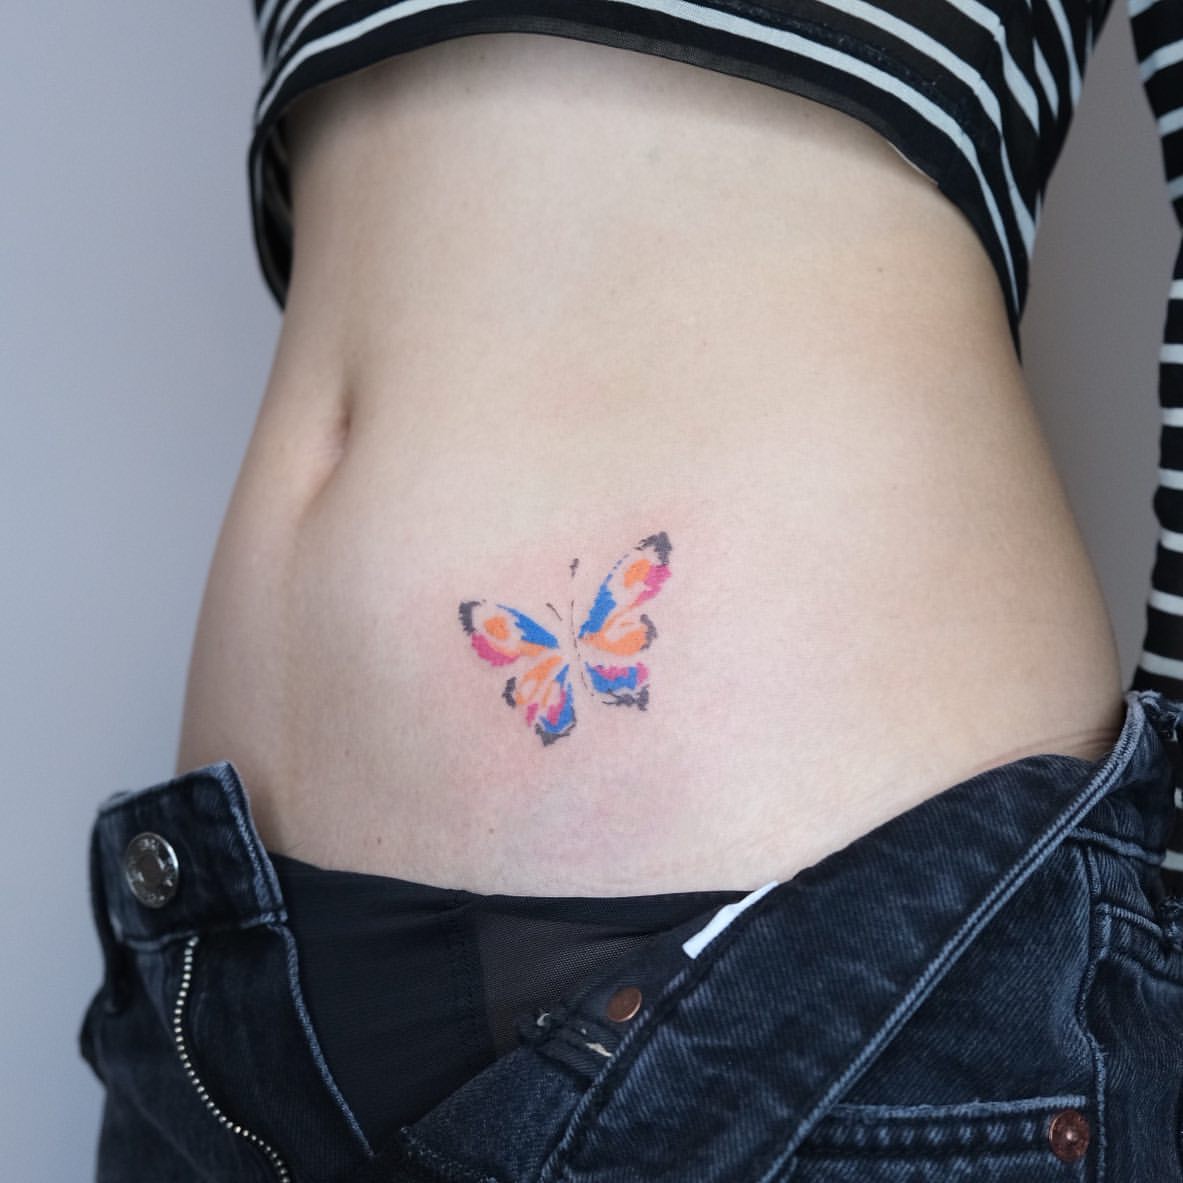 Stomach Tattoos for Women 24